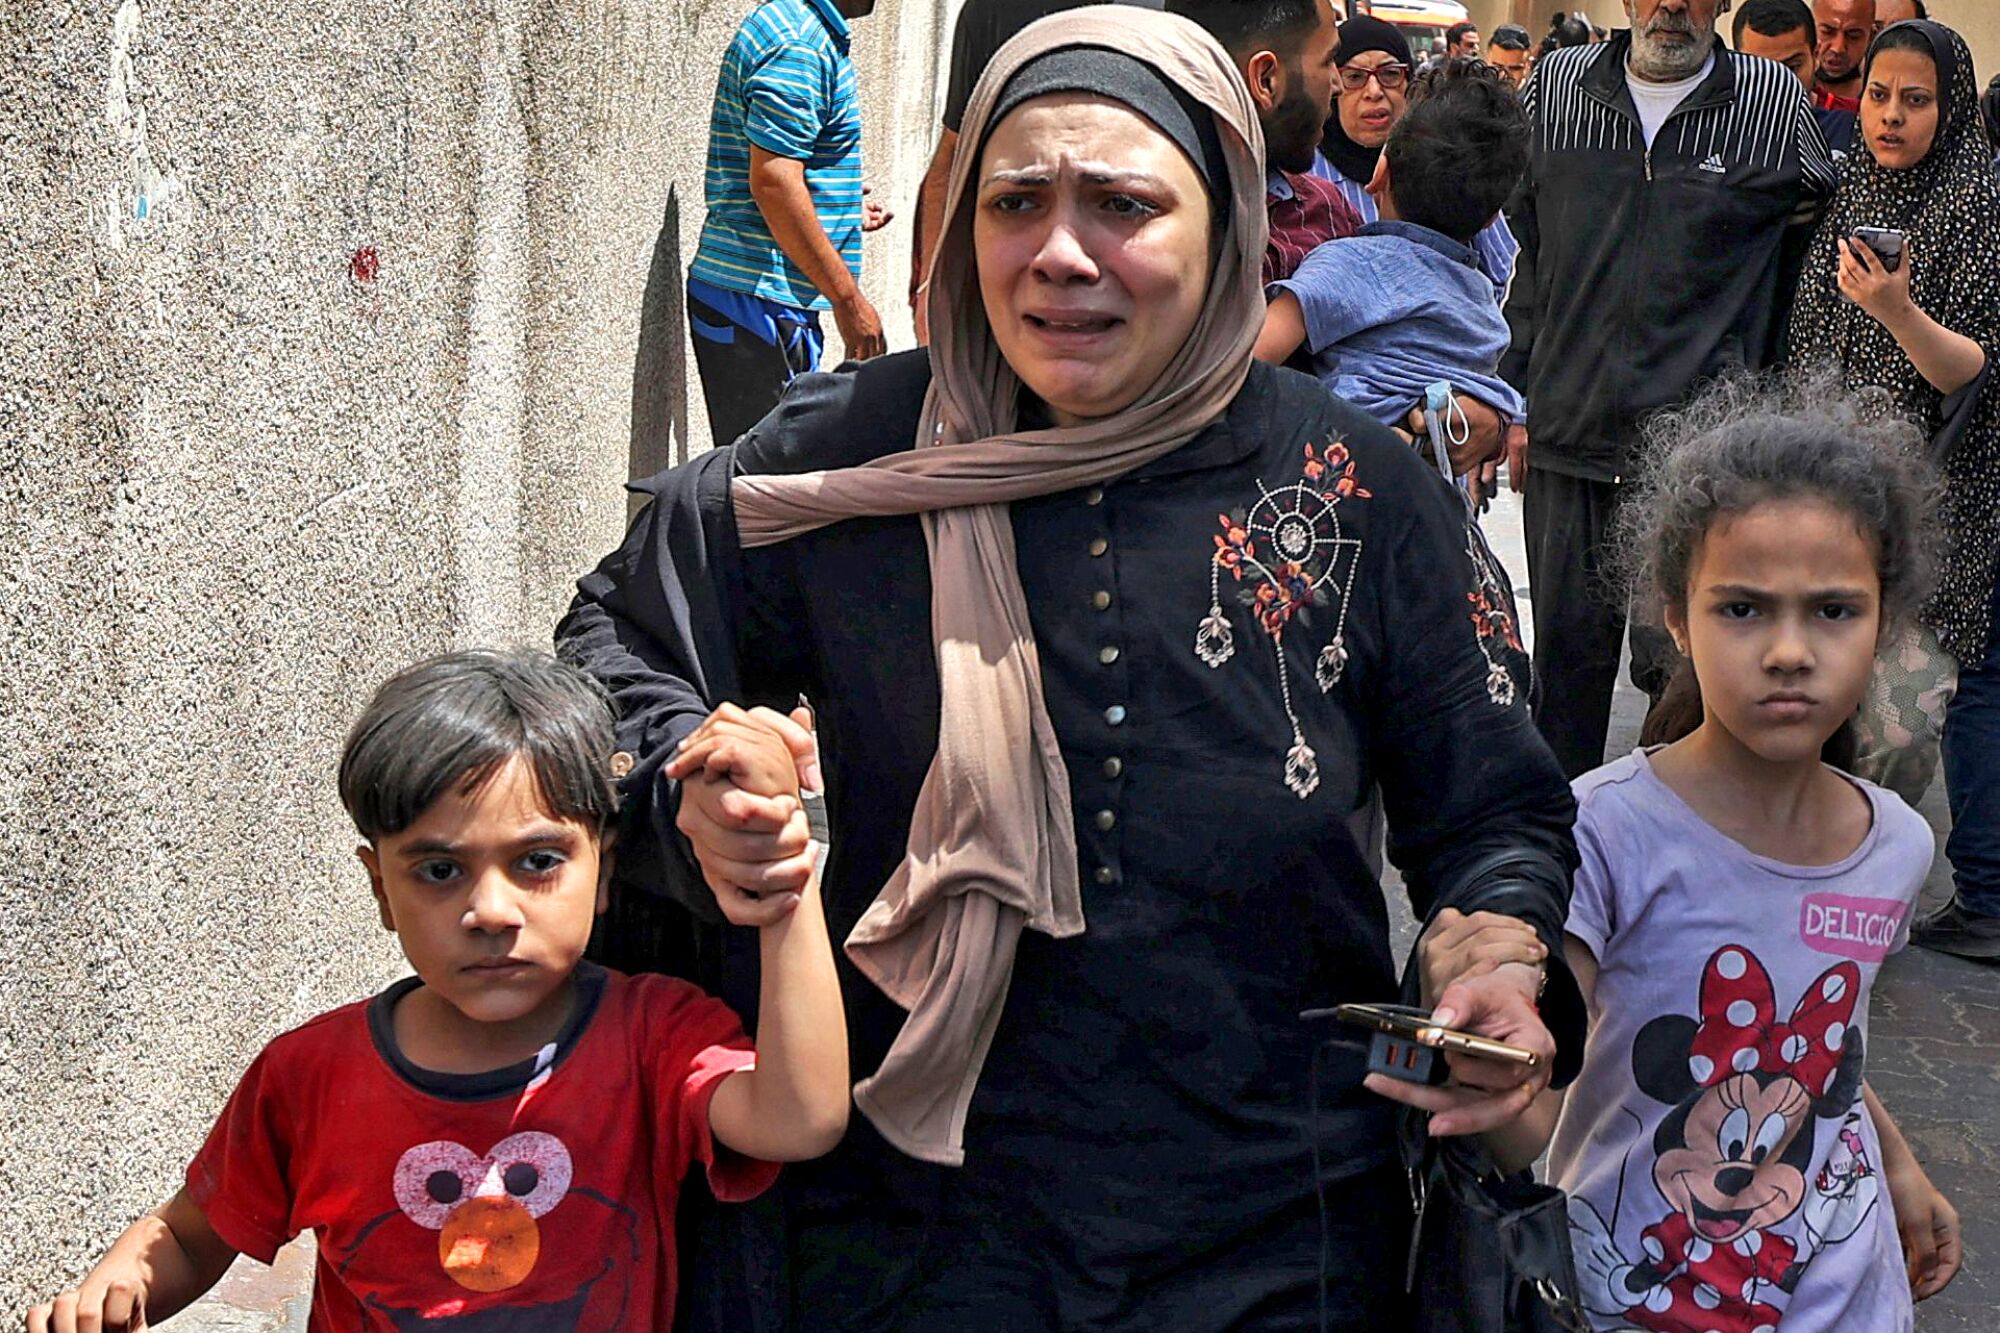 A distraught woman holds the hands of two children flanking her
